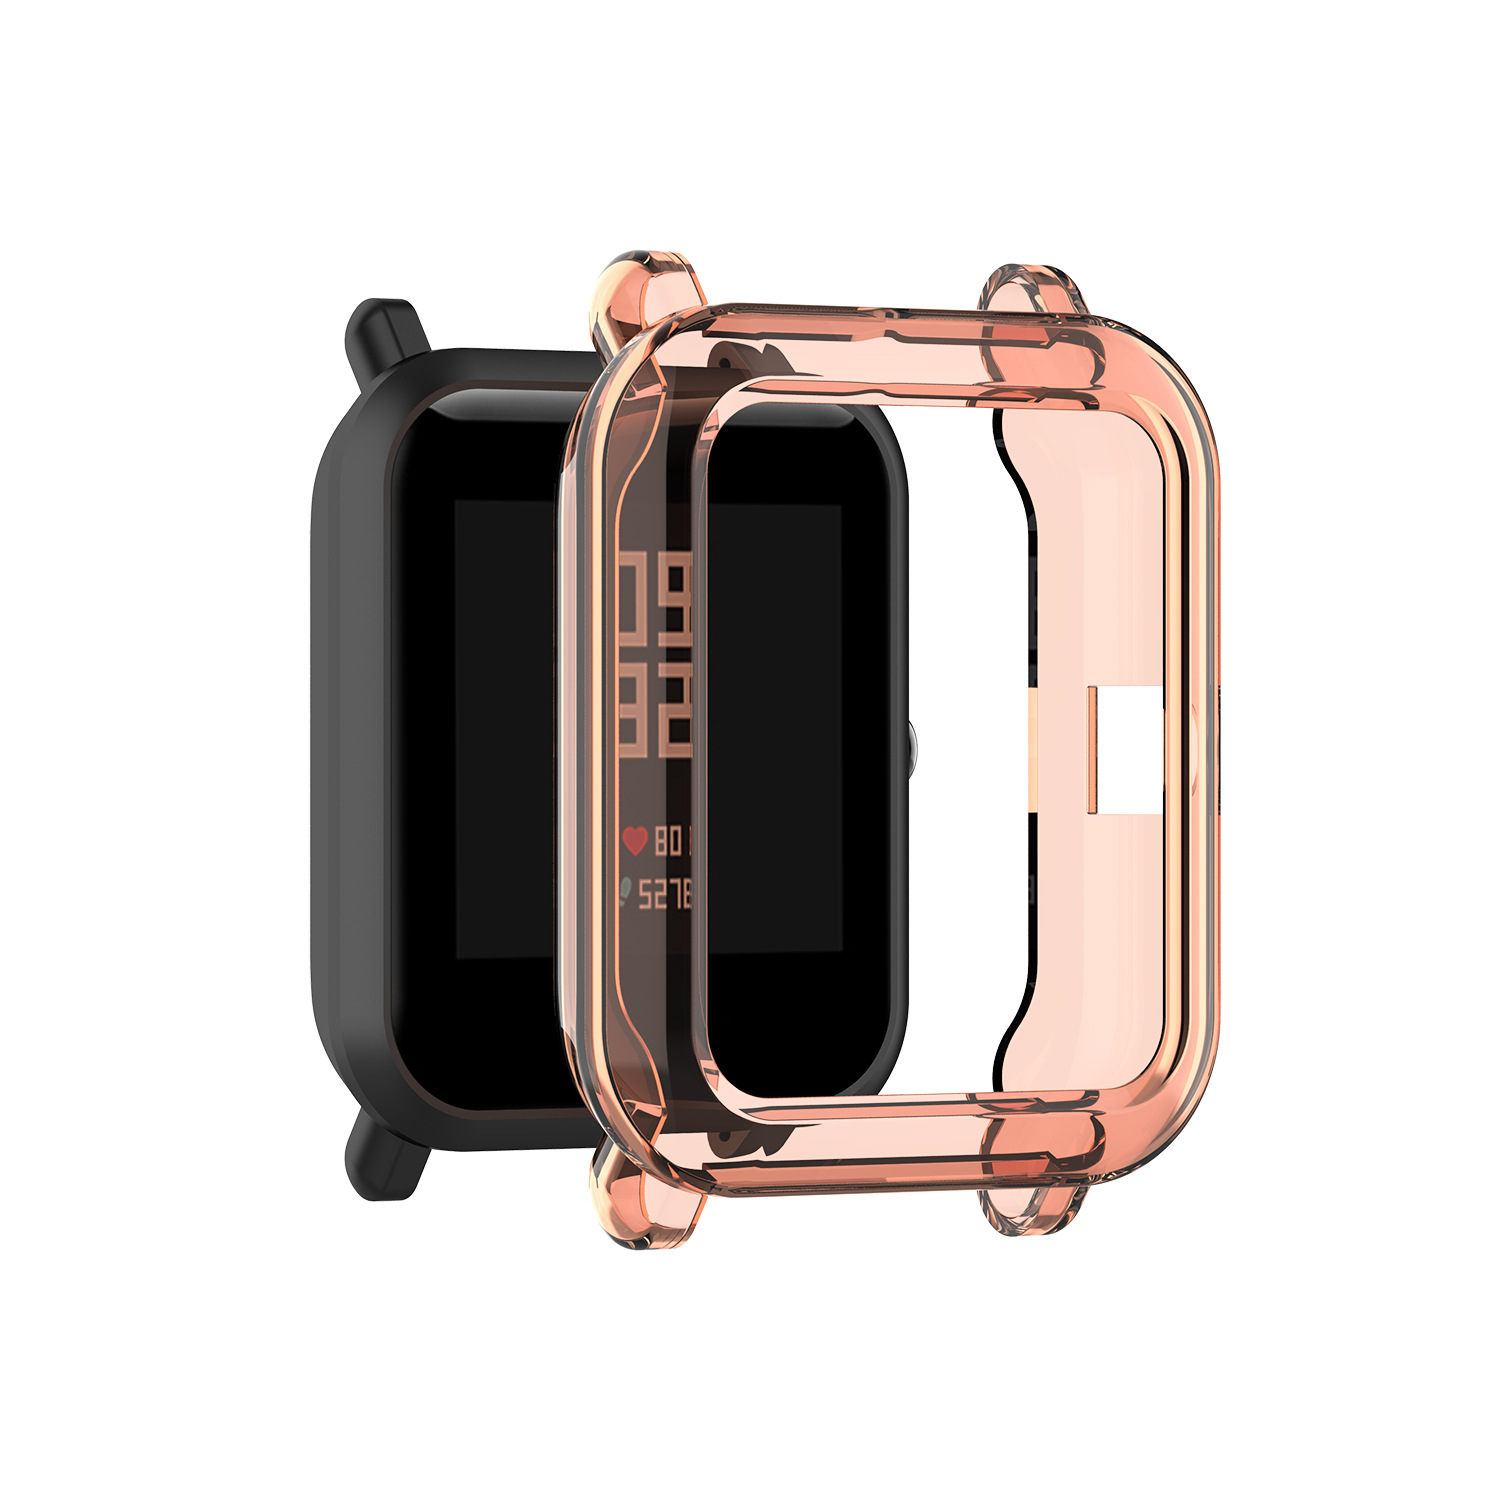 TPU-Watch-Case-Watch-Cover-Case-Cover-for-Amazfit-Bip-1S-1700224-5